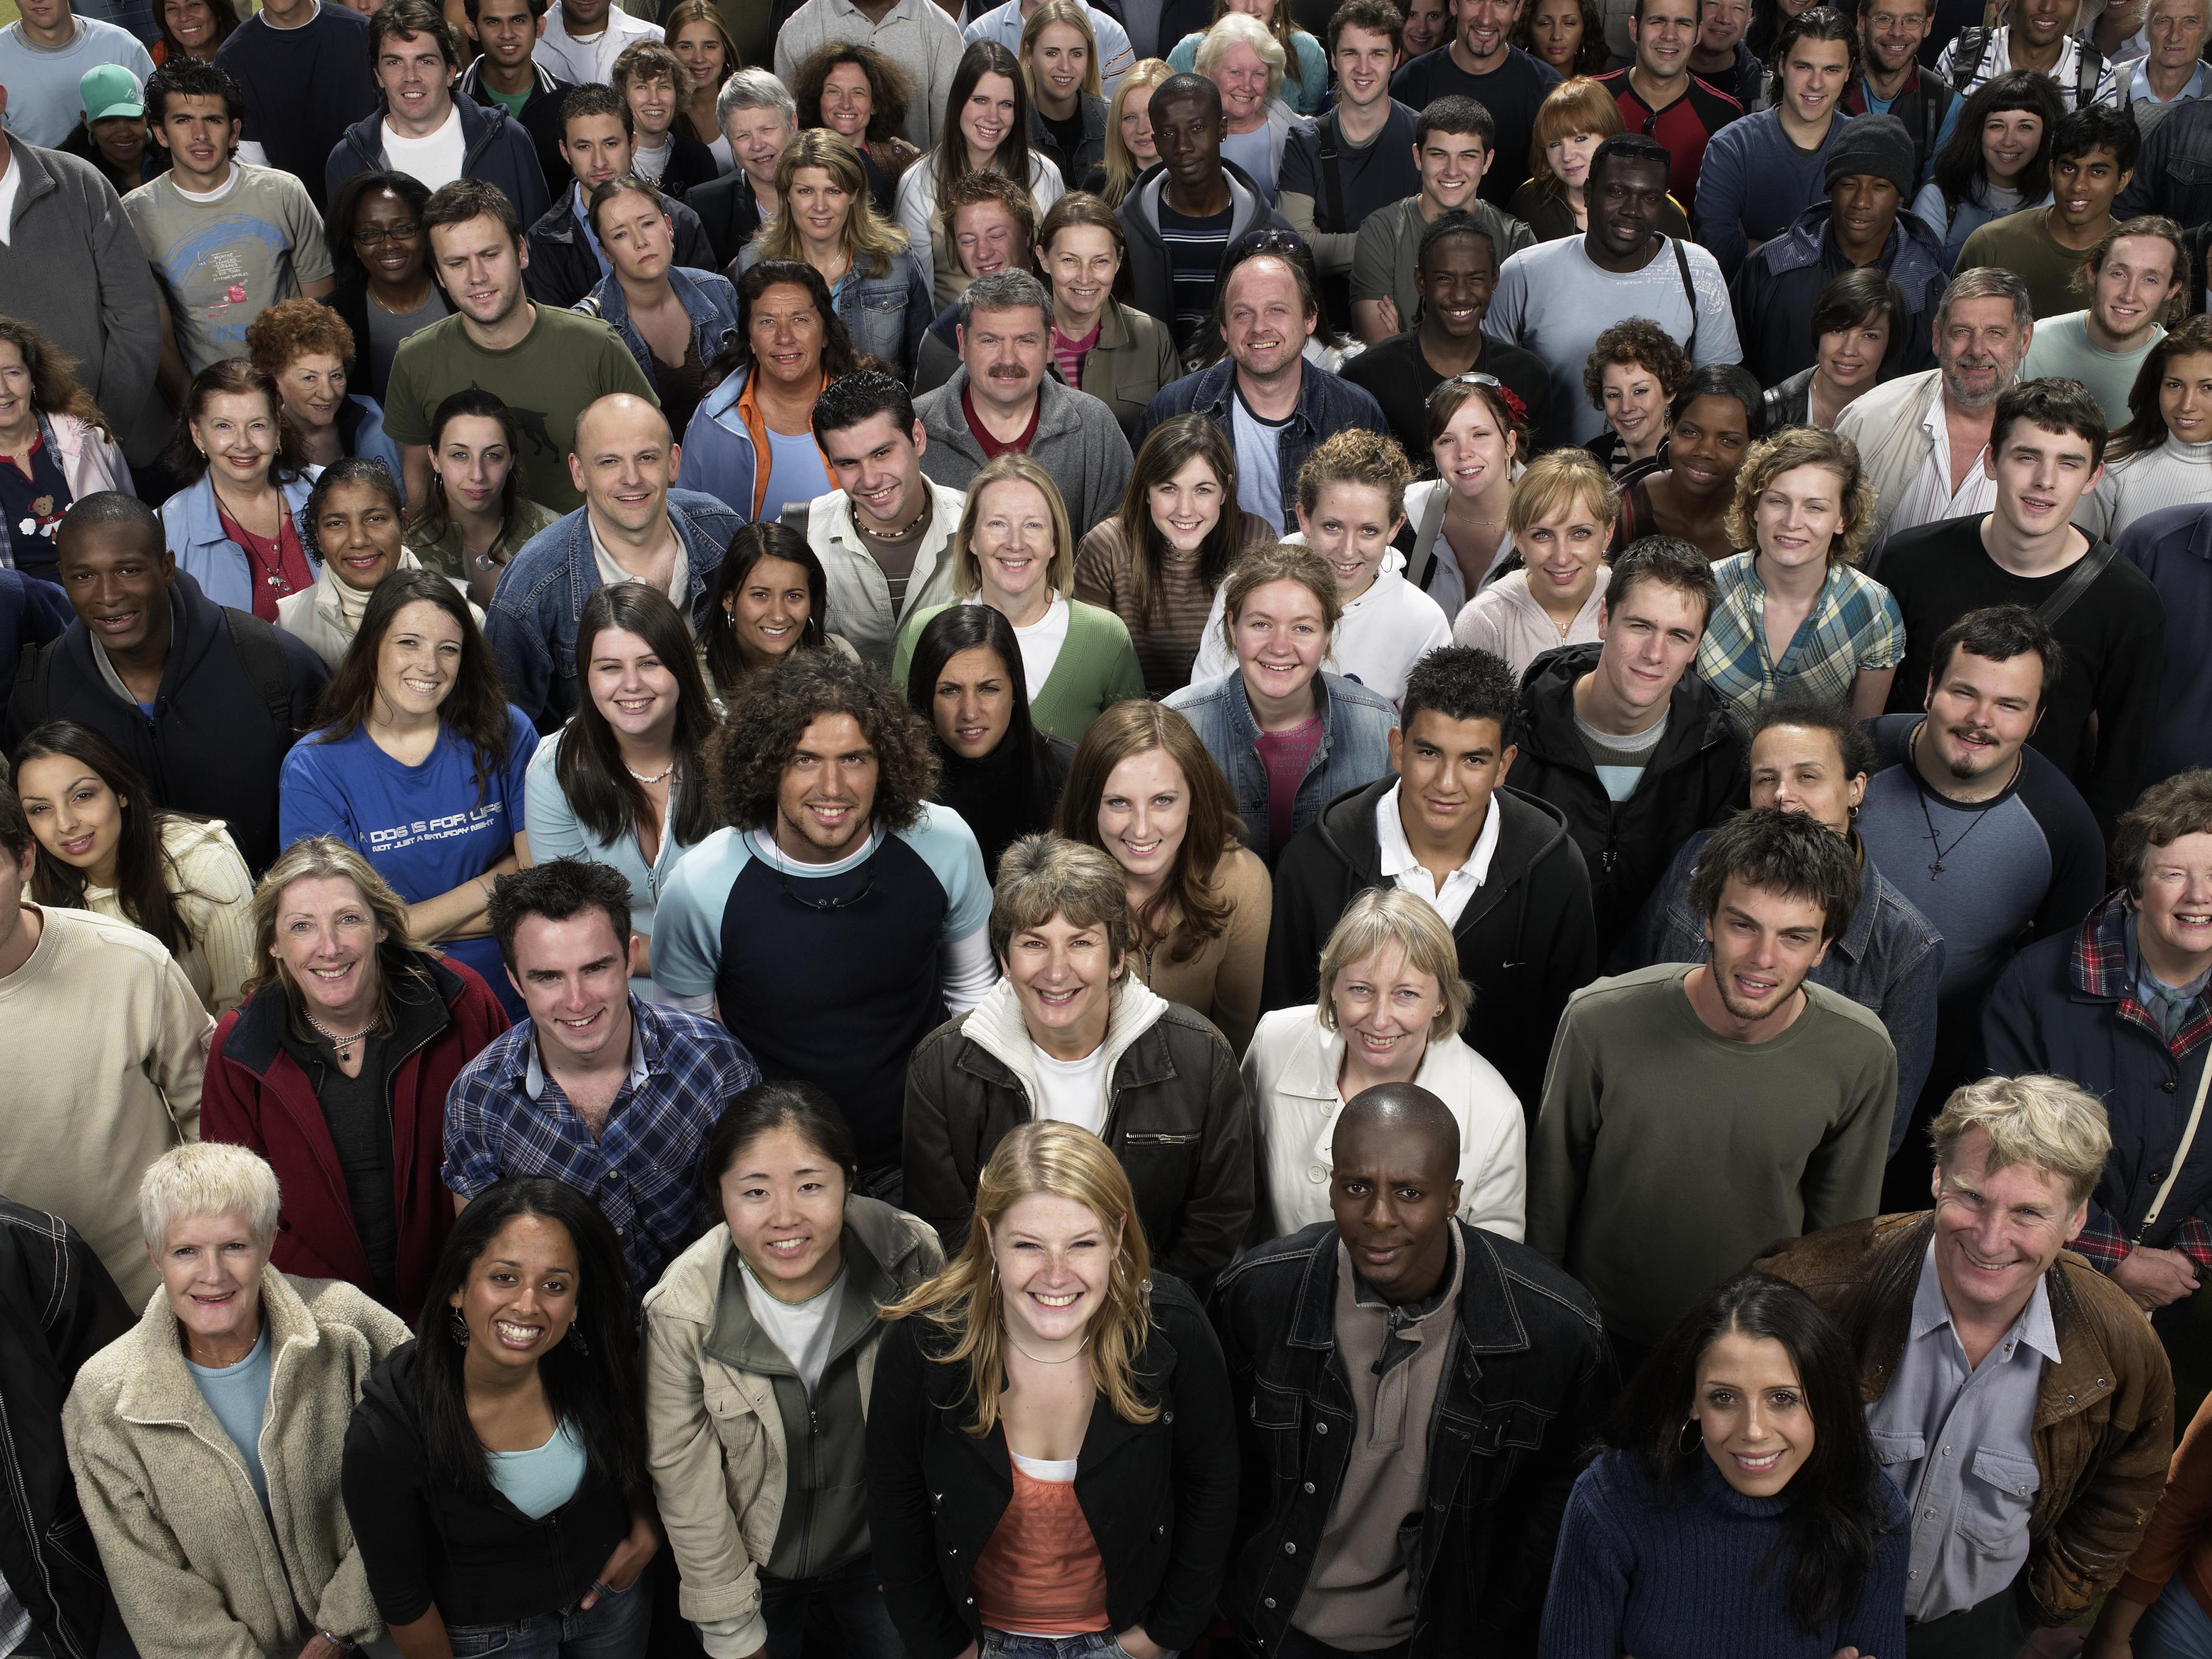 Large group of people that fill the entire image, all standing together.